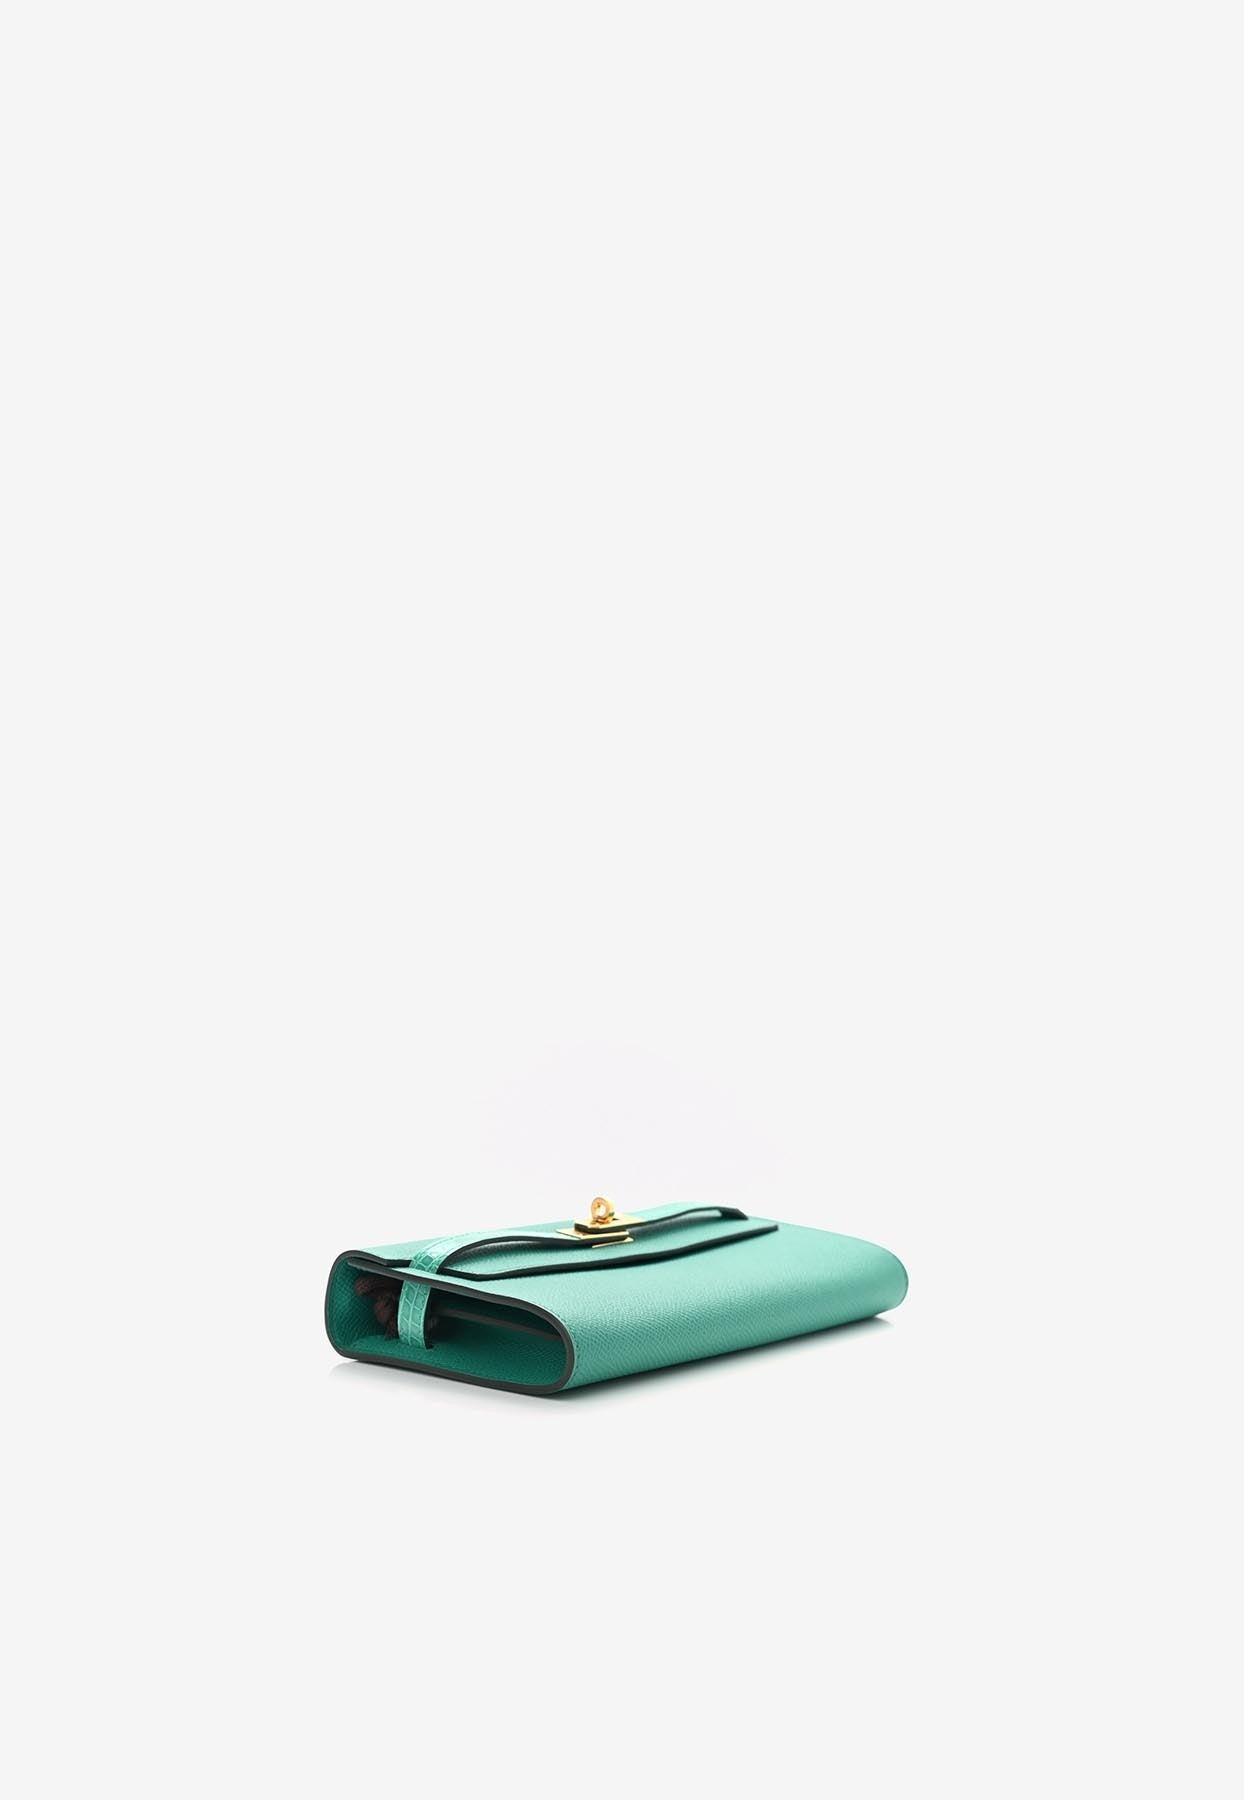 Hermès Kelly To Go Wallet In Vert Jade Epsom With Gold Hardware in